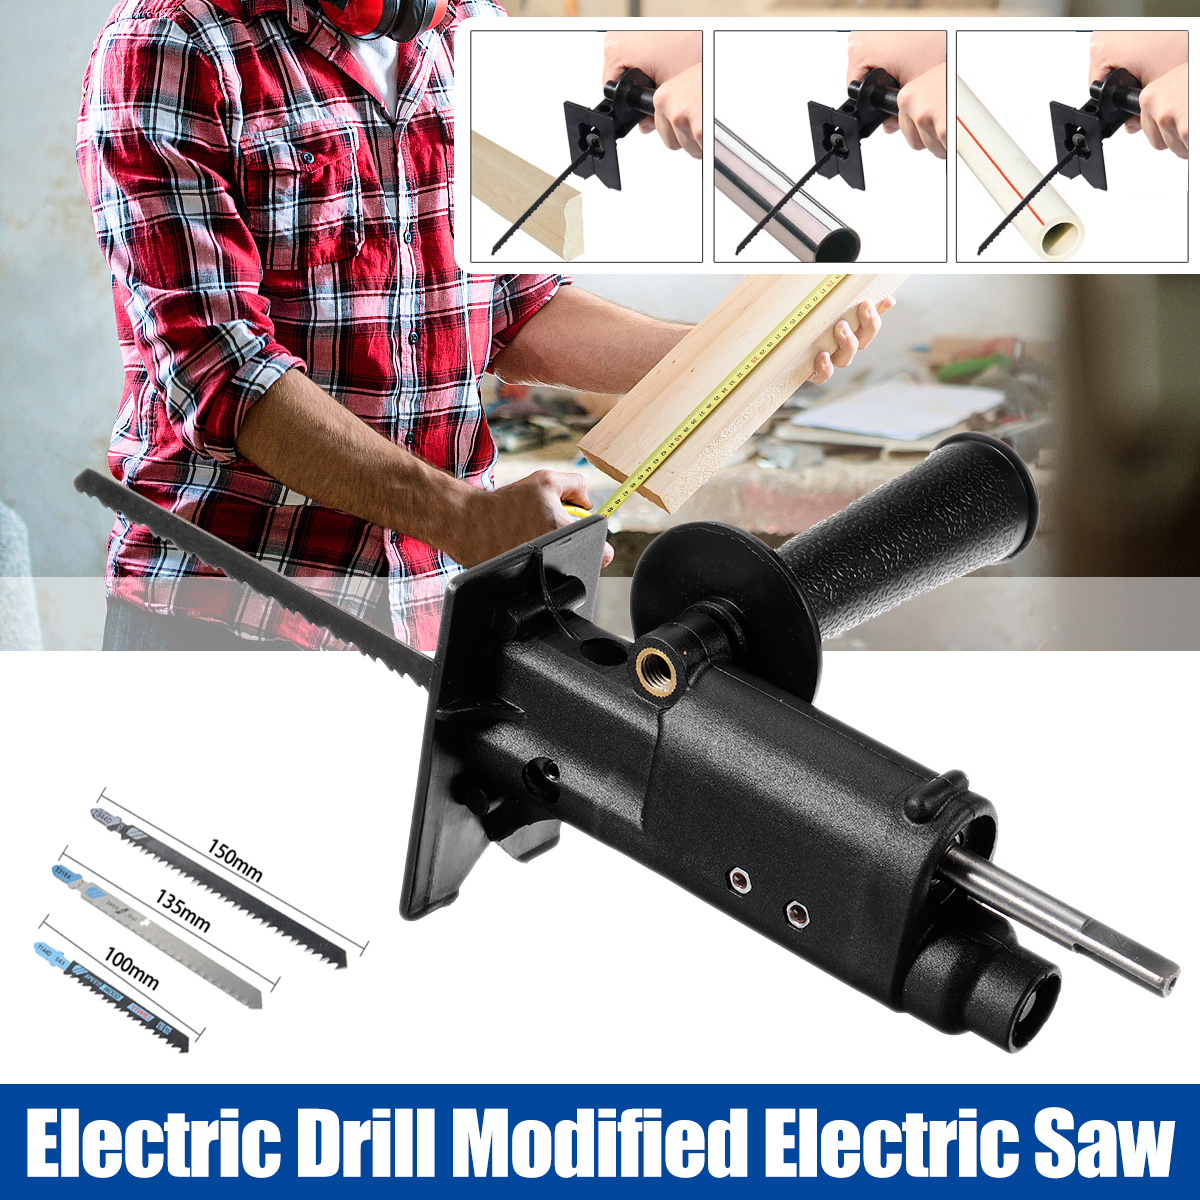 Reciprocating-Saw-Attachment-Adapter-Change-Electric-Drill-Into-Reciprocating-Saw-Jig-Saw-Woodworkin-1793120-1